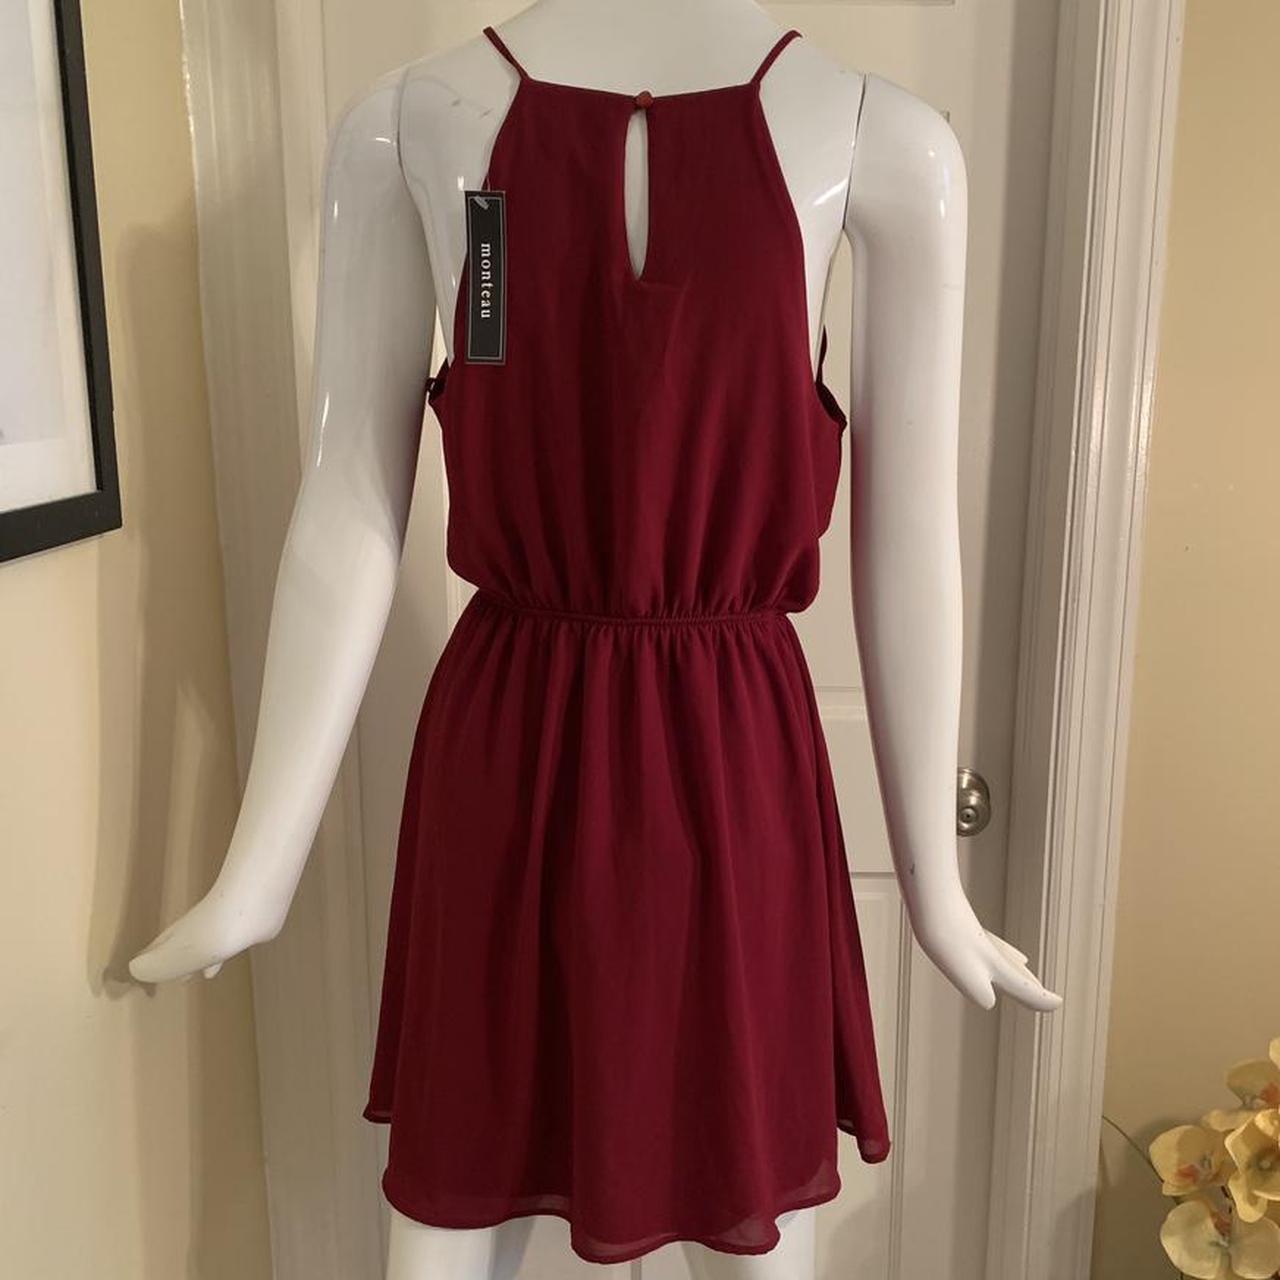 Bremont Women's Red and Burgundy Dress (2)